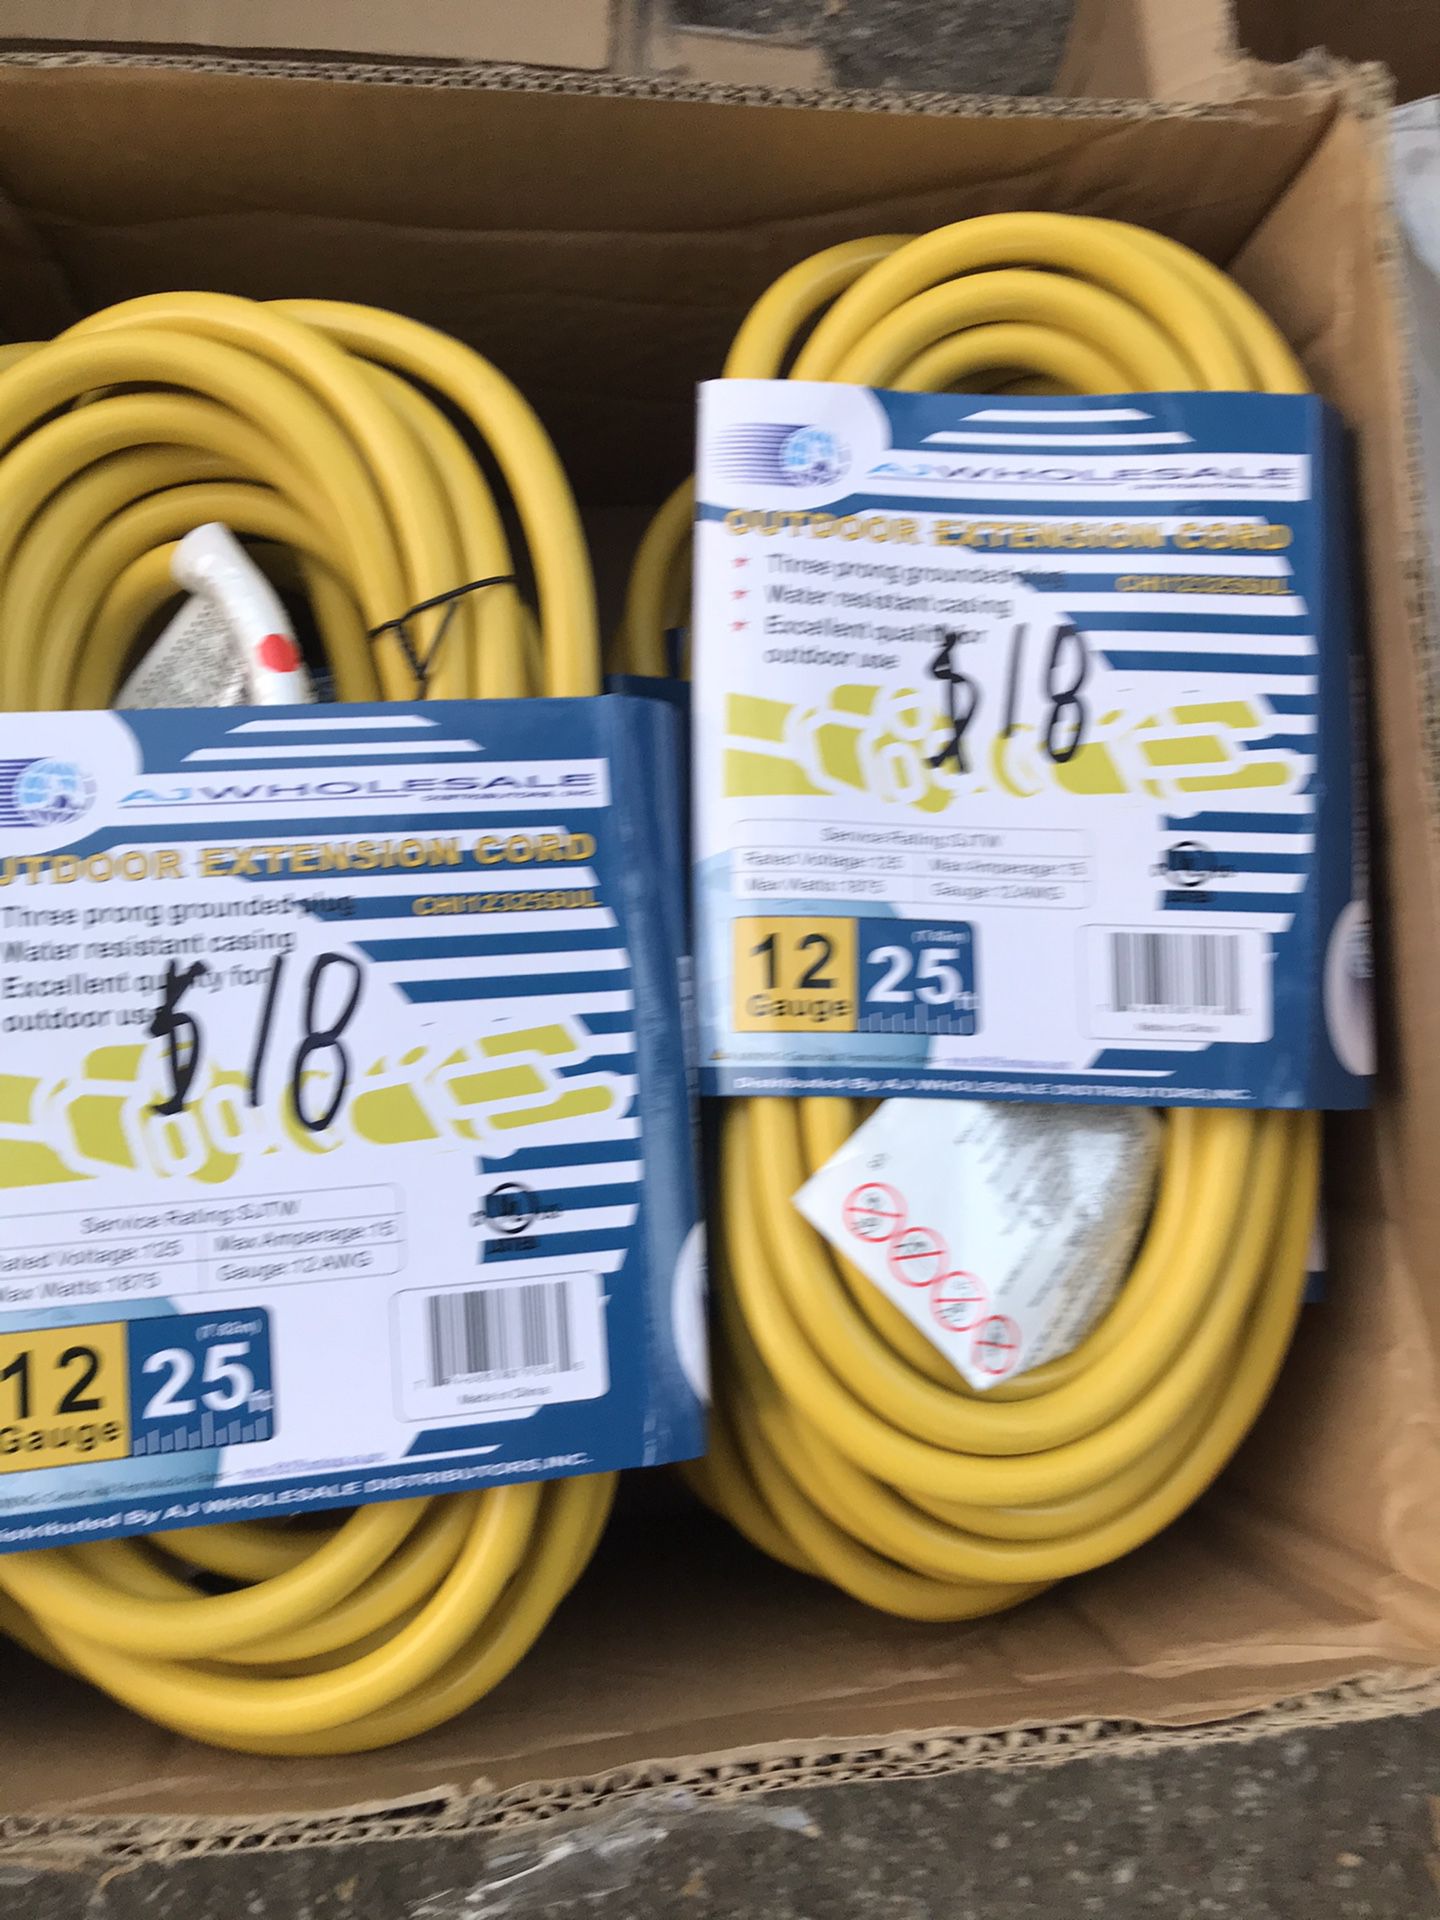 Outdoor extension cord 25 feet